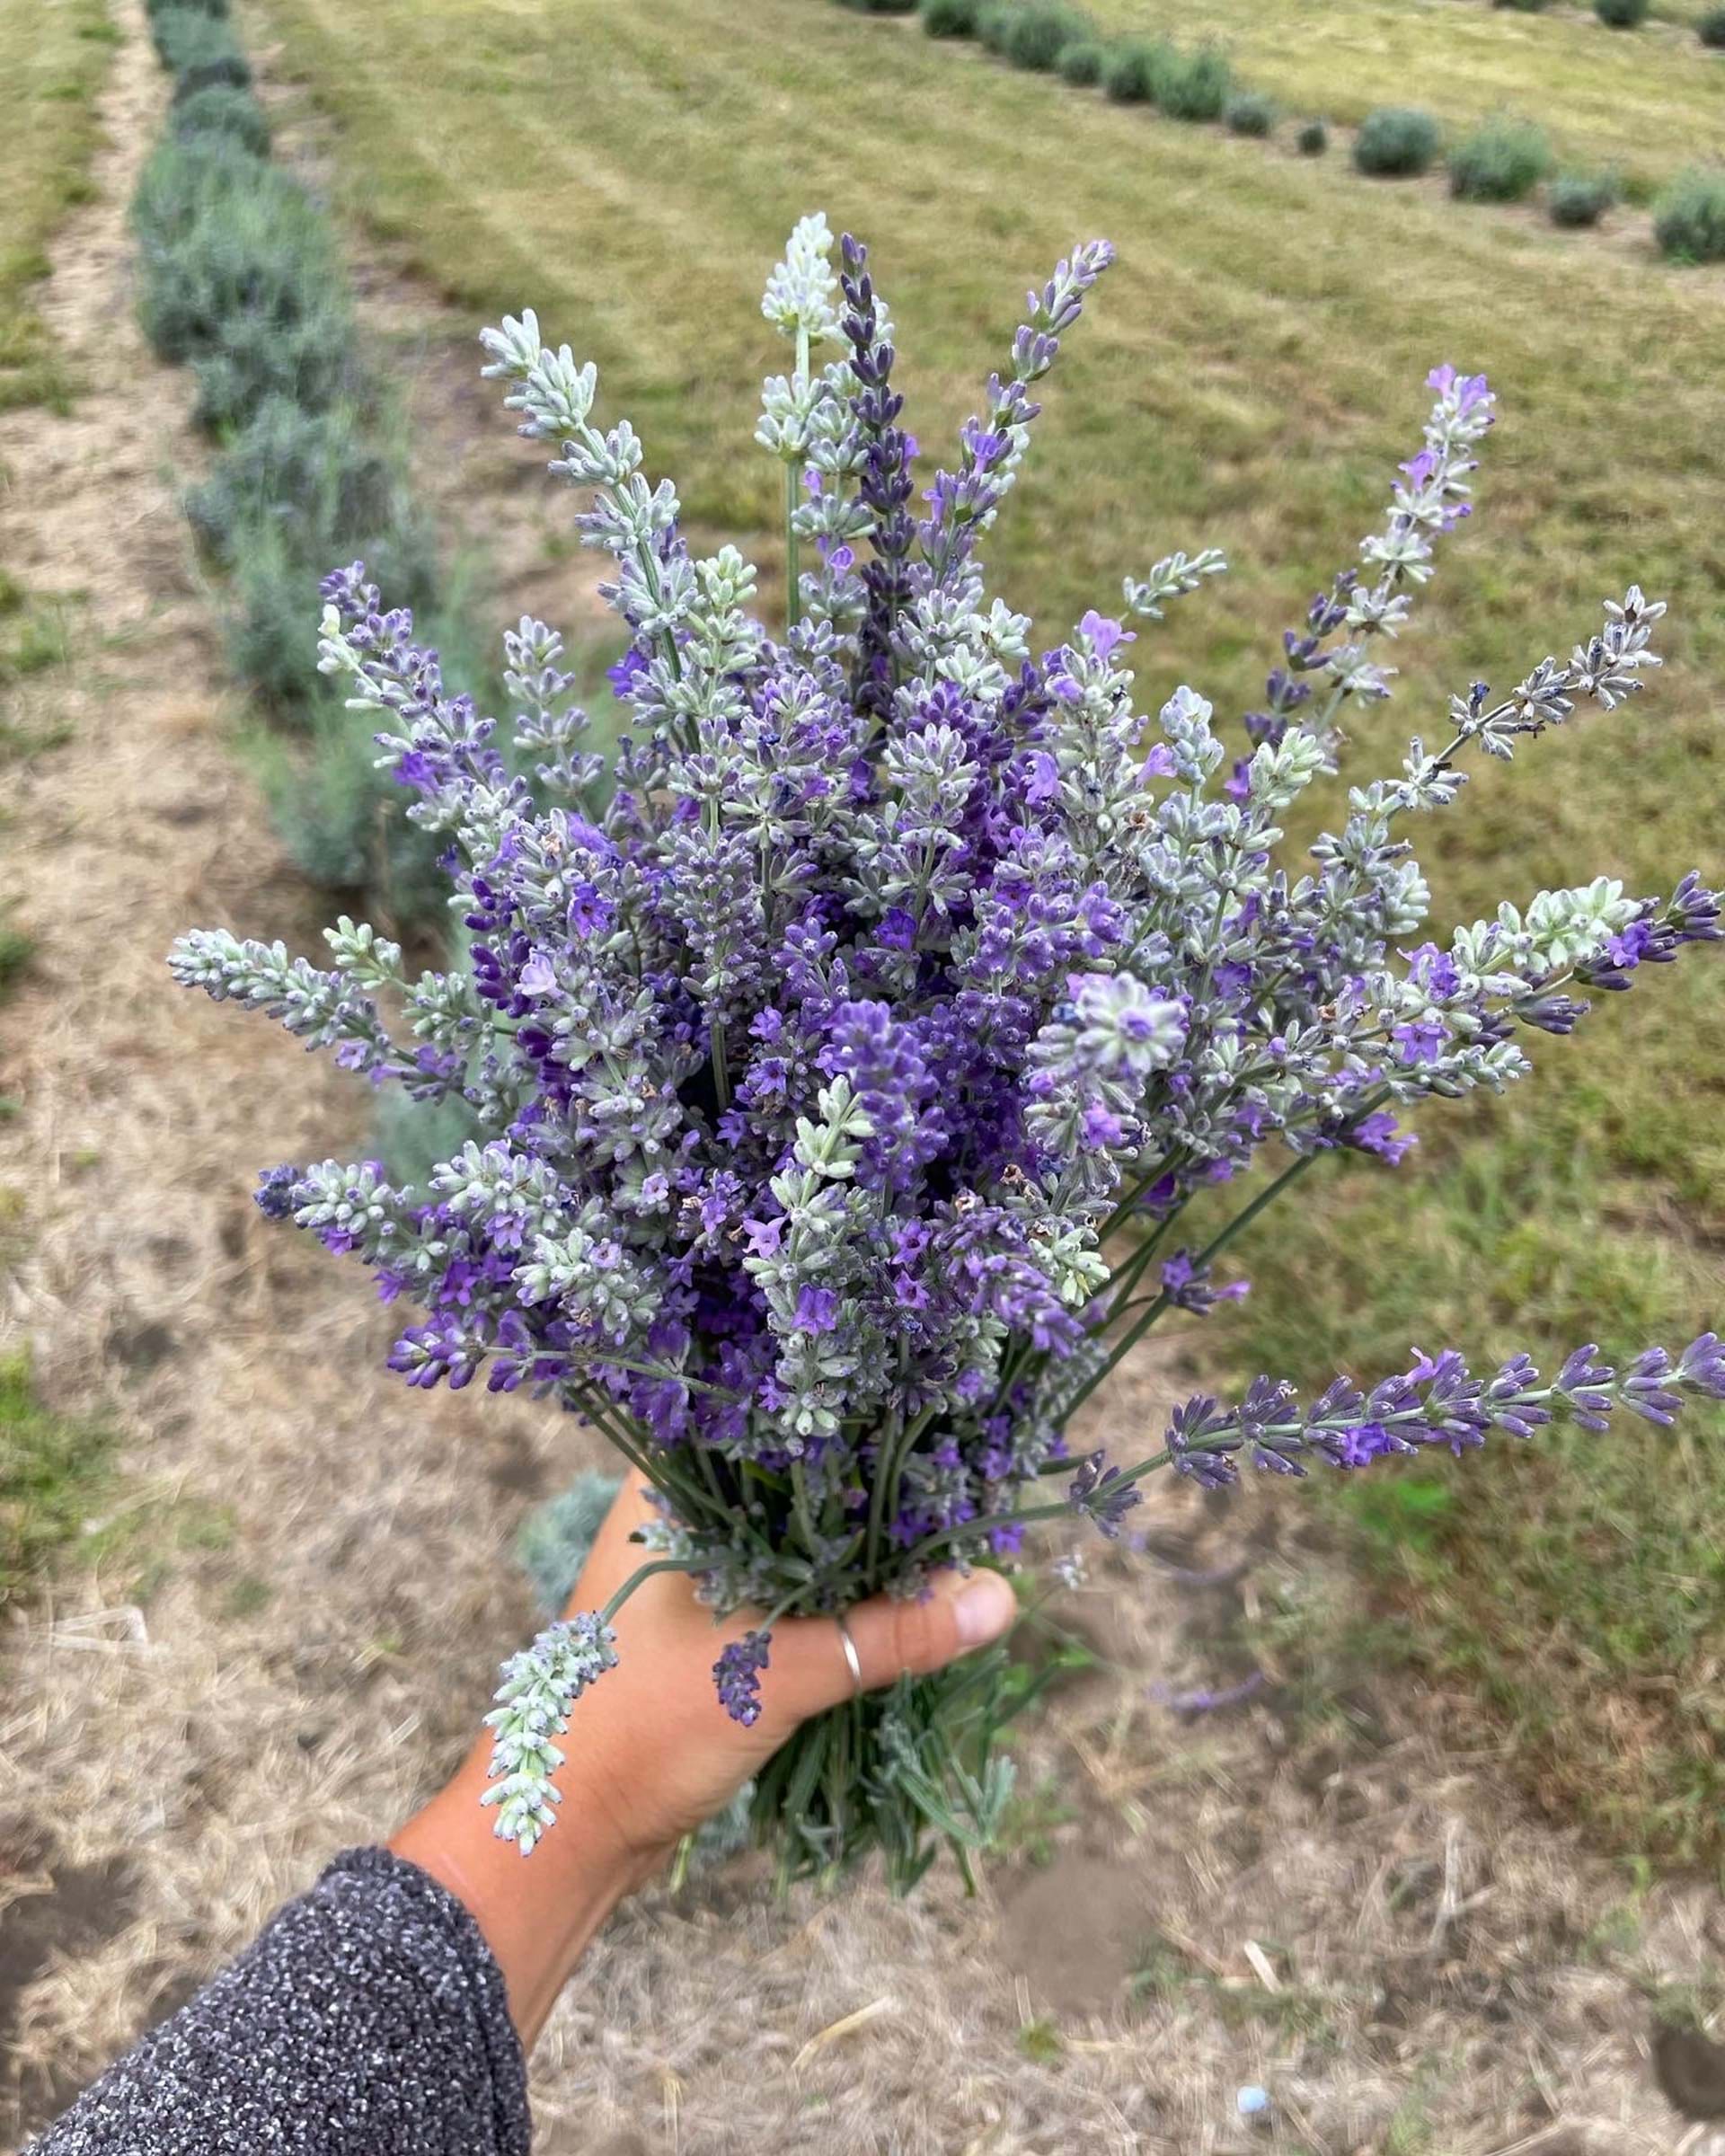 Many different varieties of lavender create beautiful bouquets